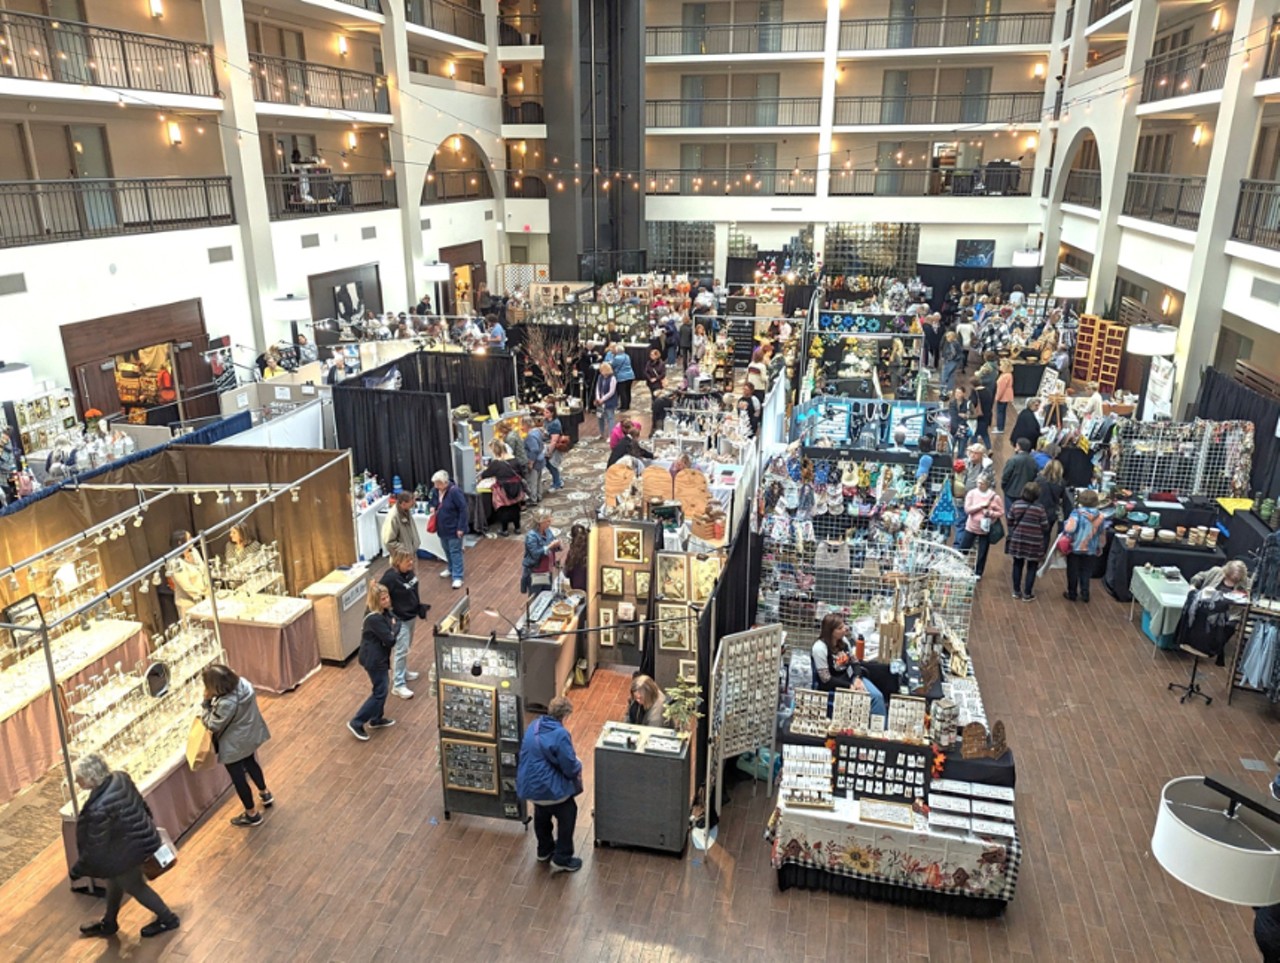 
Handcrafters Spring Fling Handmade Market
When: April 19 from 9 a.m.-6 p.m. and April 20 from 9 a.m.-4 p.m.
Where: Embassy Suites Hotel (Livonia)
What: A handmade goods market
Who: Local crafters
Why: The market is the perfect chance to stock up on gifts, garden art, seasonal decorations, fashion, and more. 